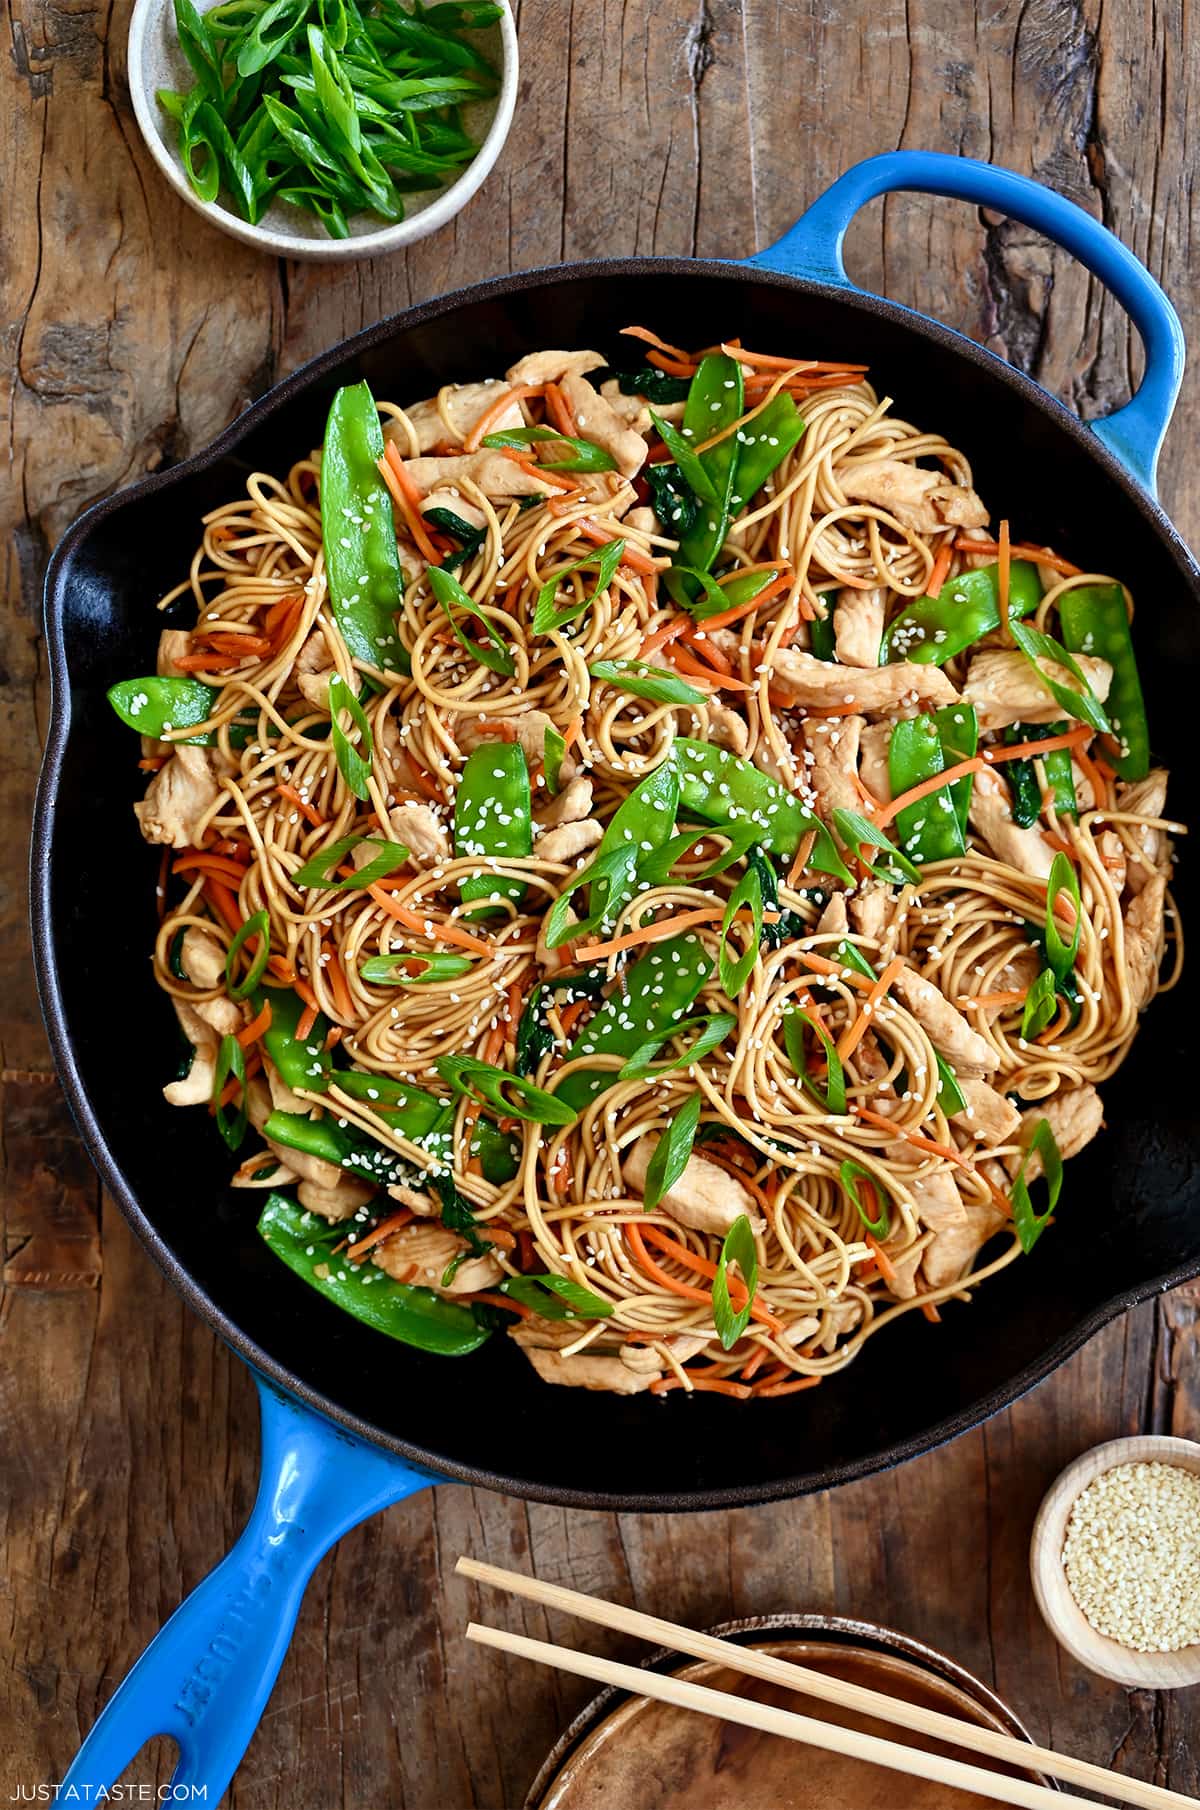 A large skillet containing stir-fried noodles, chicken pieces, snow peas, spinach and shredded carrots.